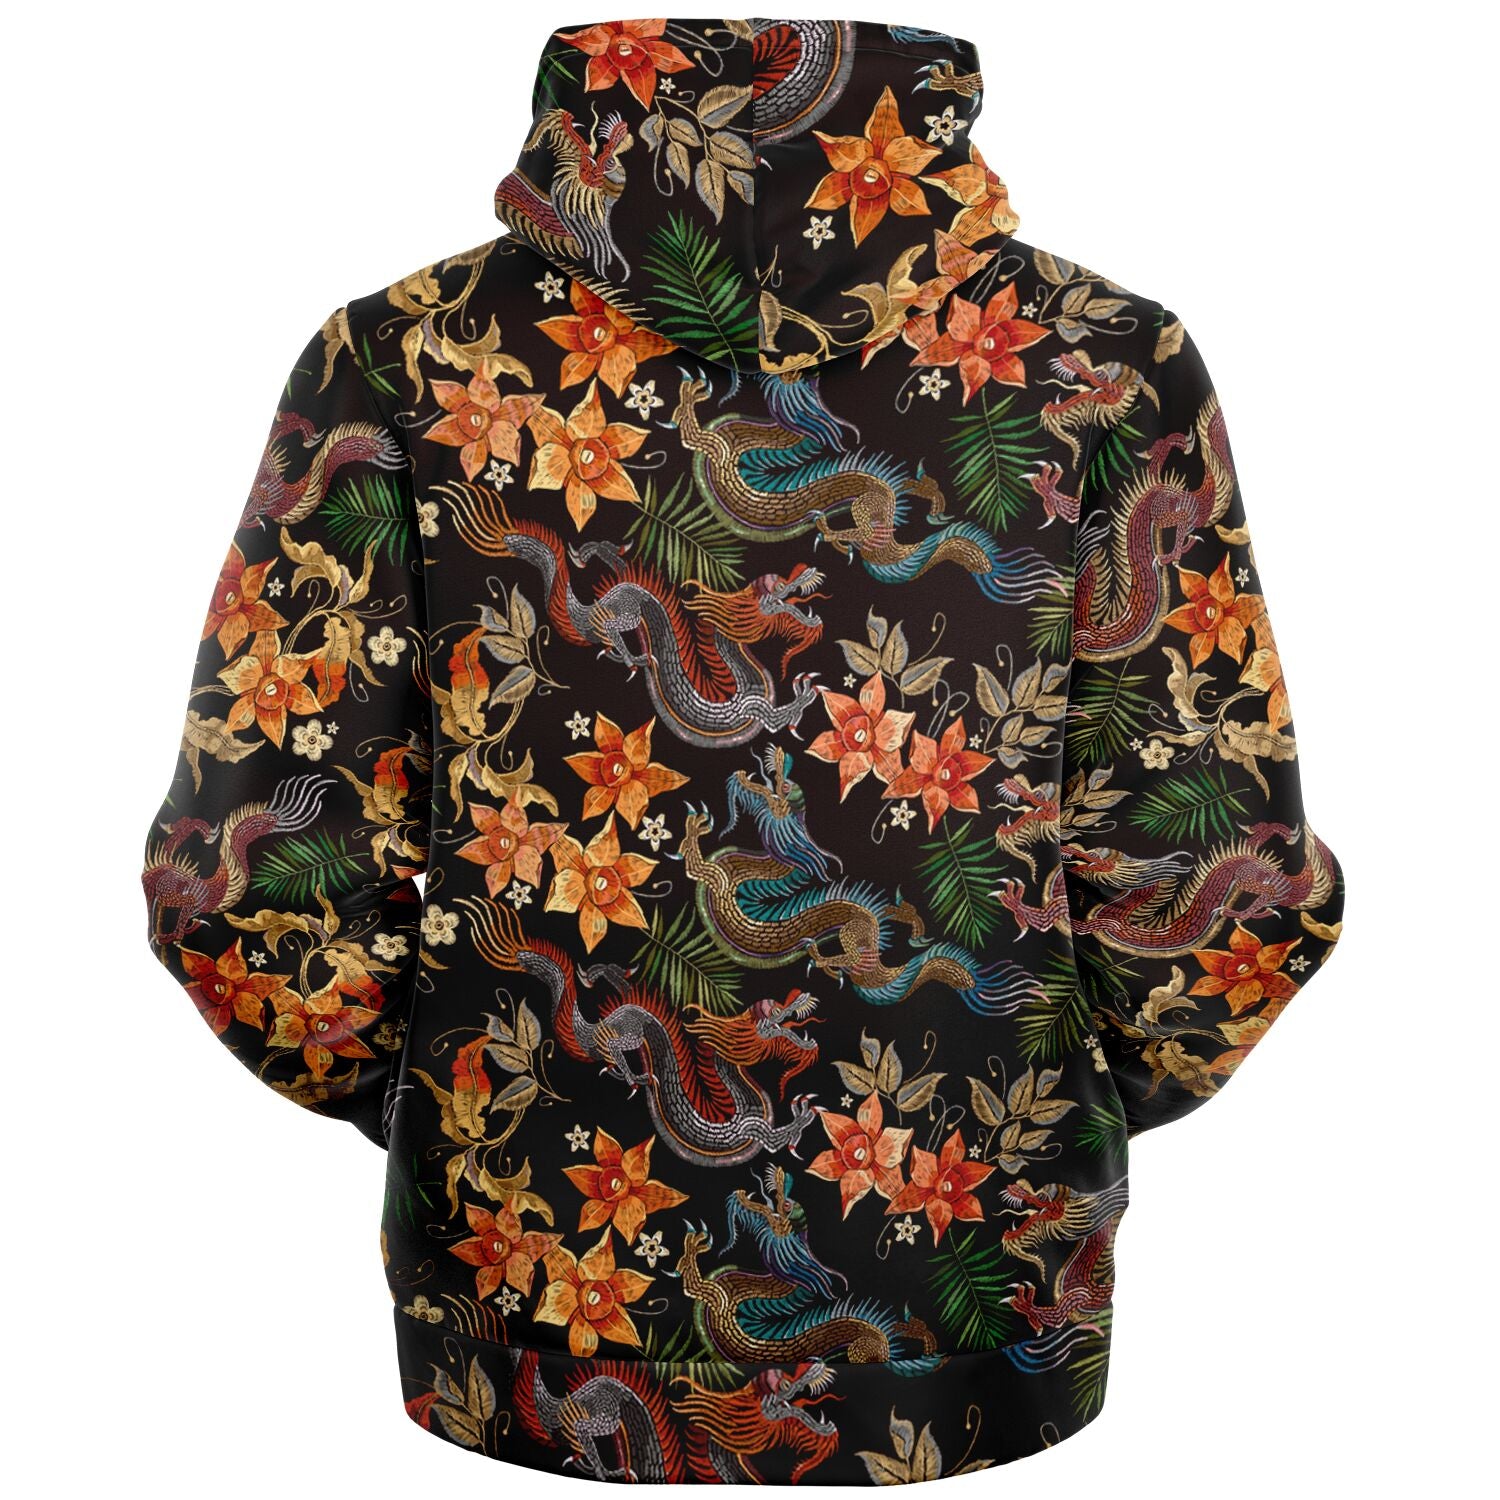 Harajuku Dragon and Floral Orange Blossom Microfleece Zip-Up Hoodie - Perfect for Festivals, Lounge Wear, and Outdoor Activities